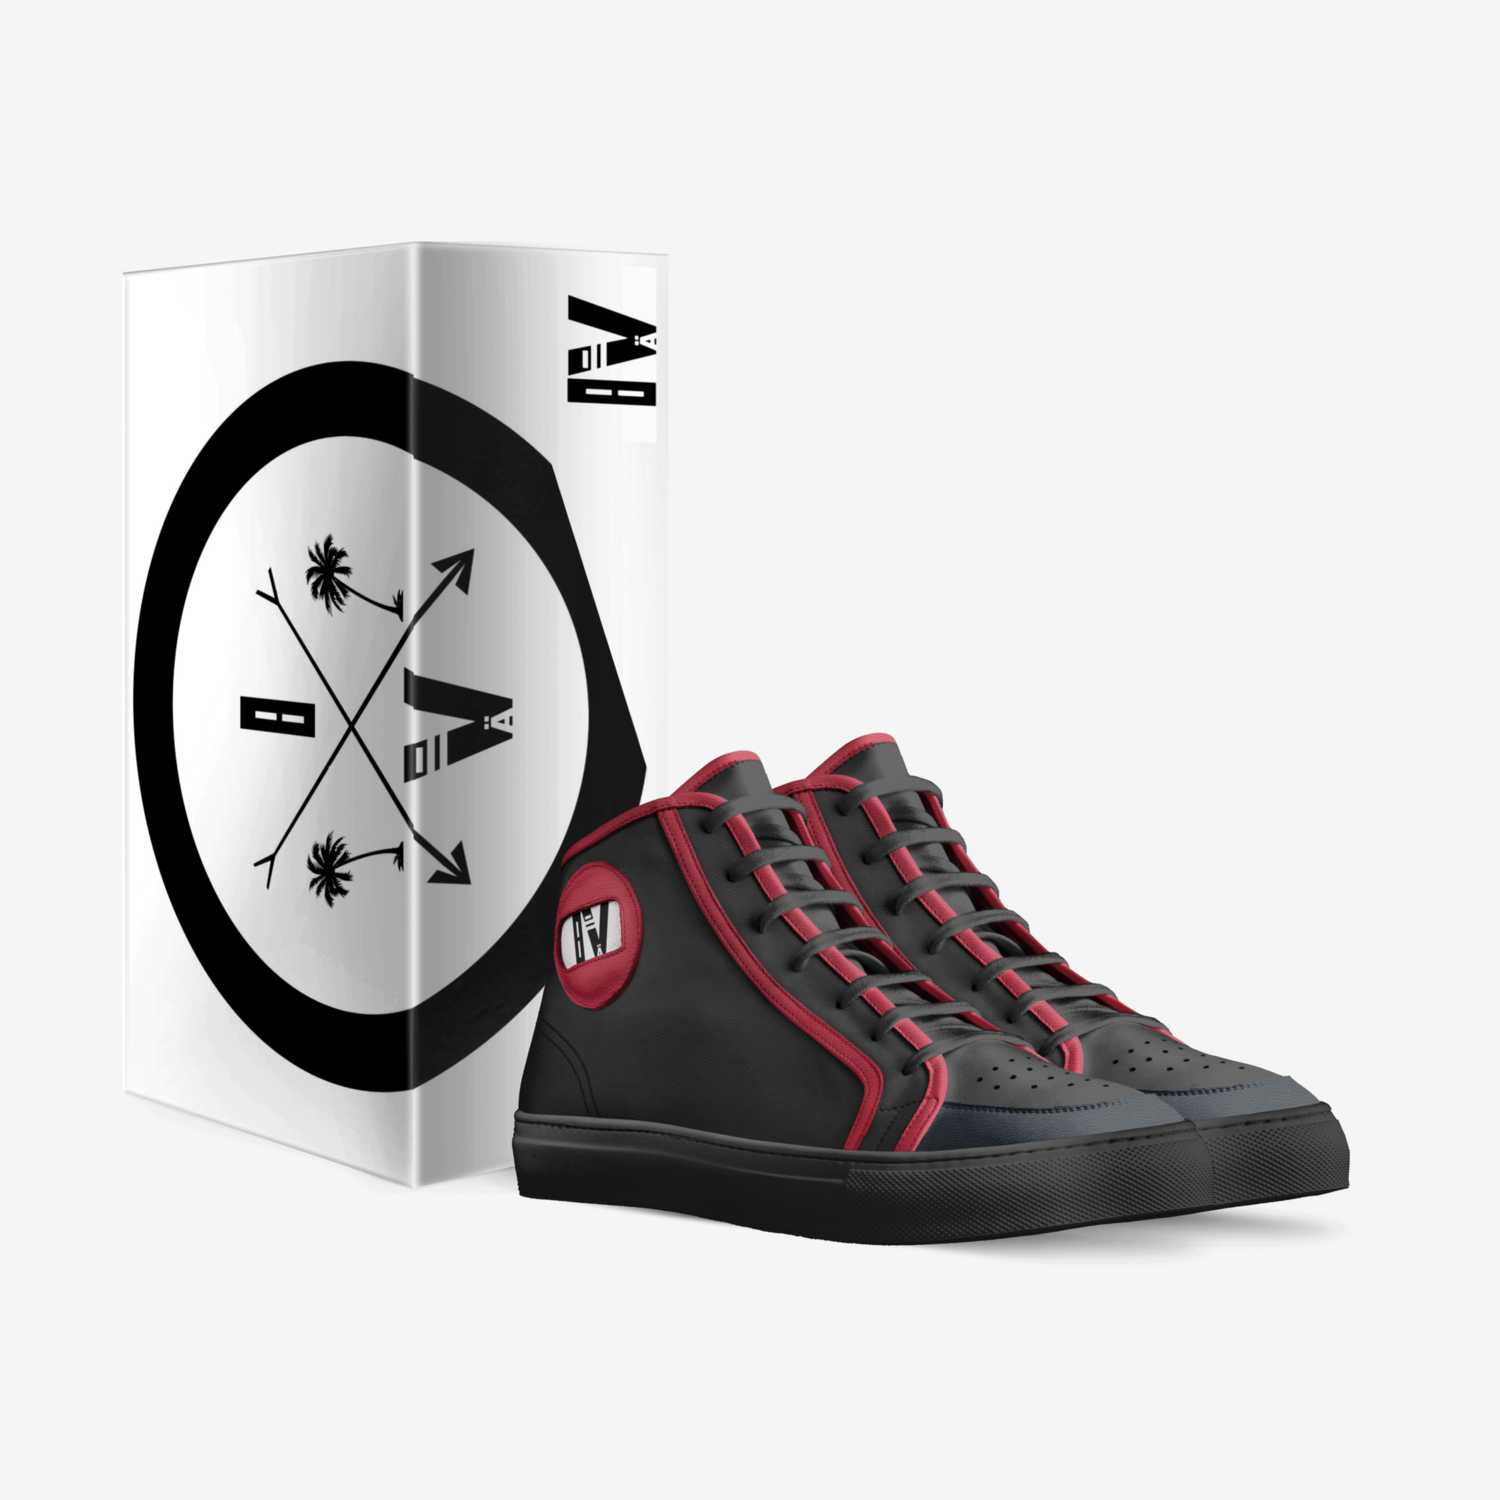 Illie Ill custom made in Italy shoes by John Luckey Iii | Box view